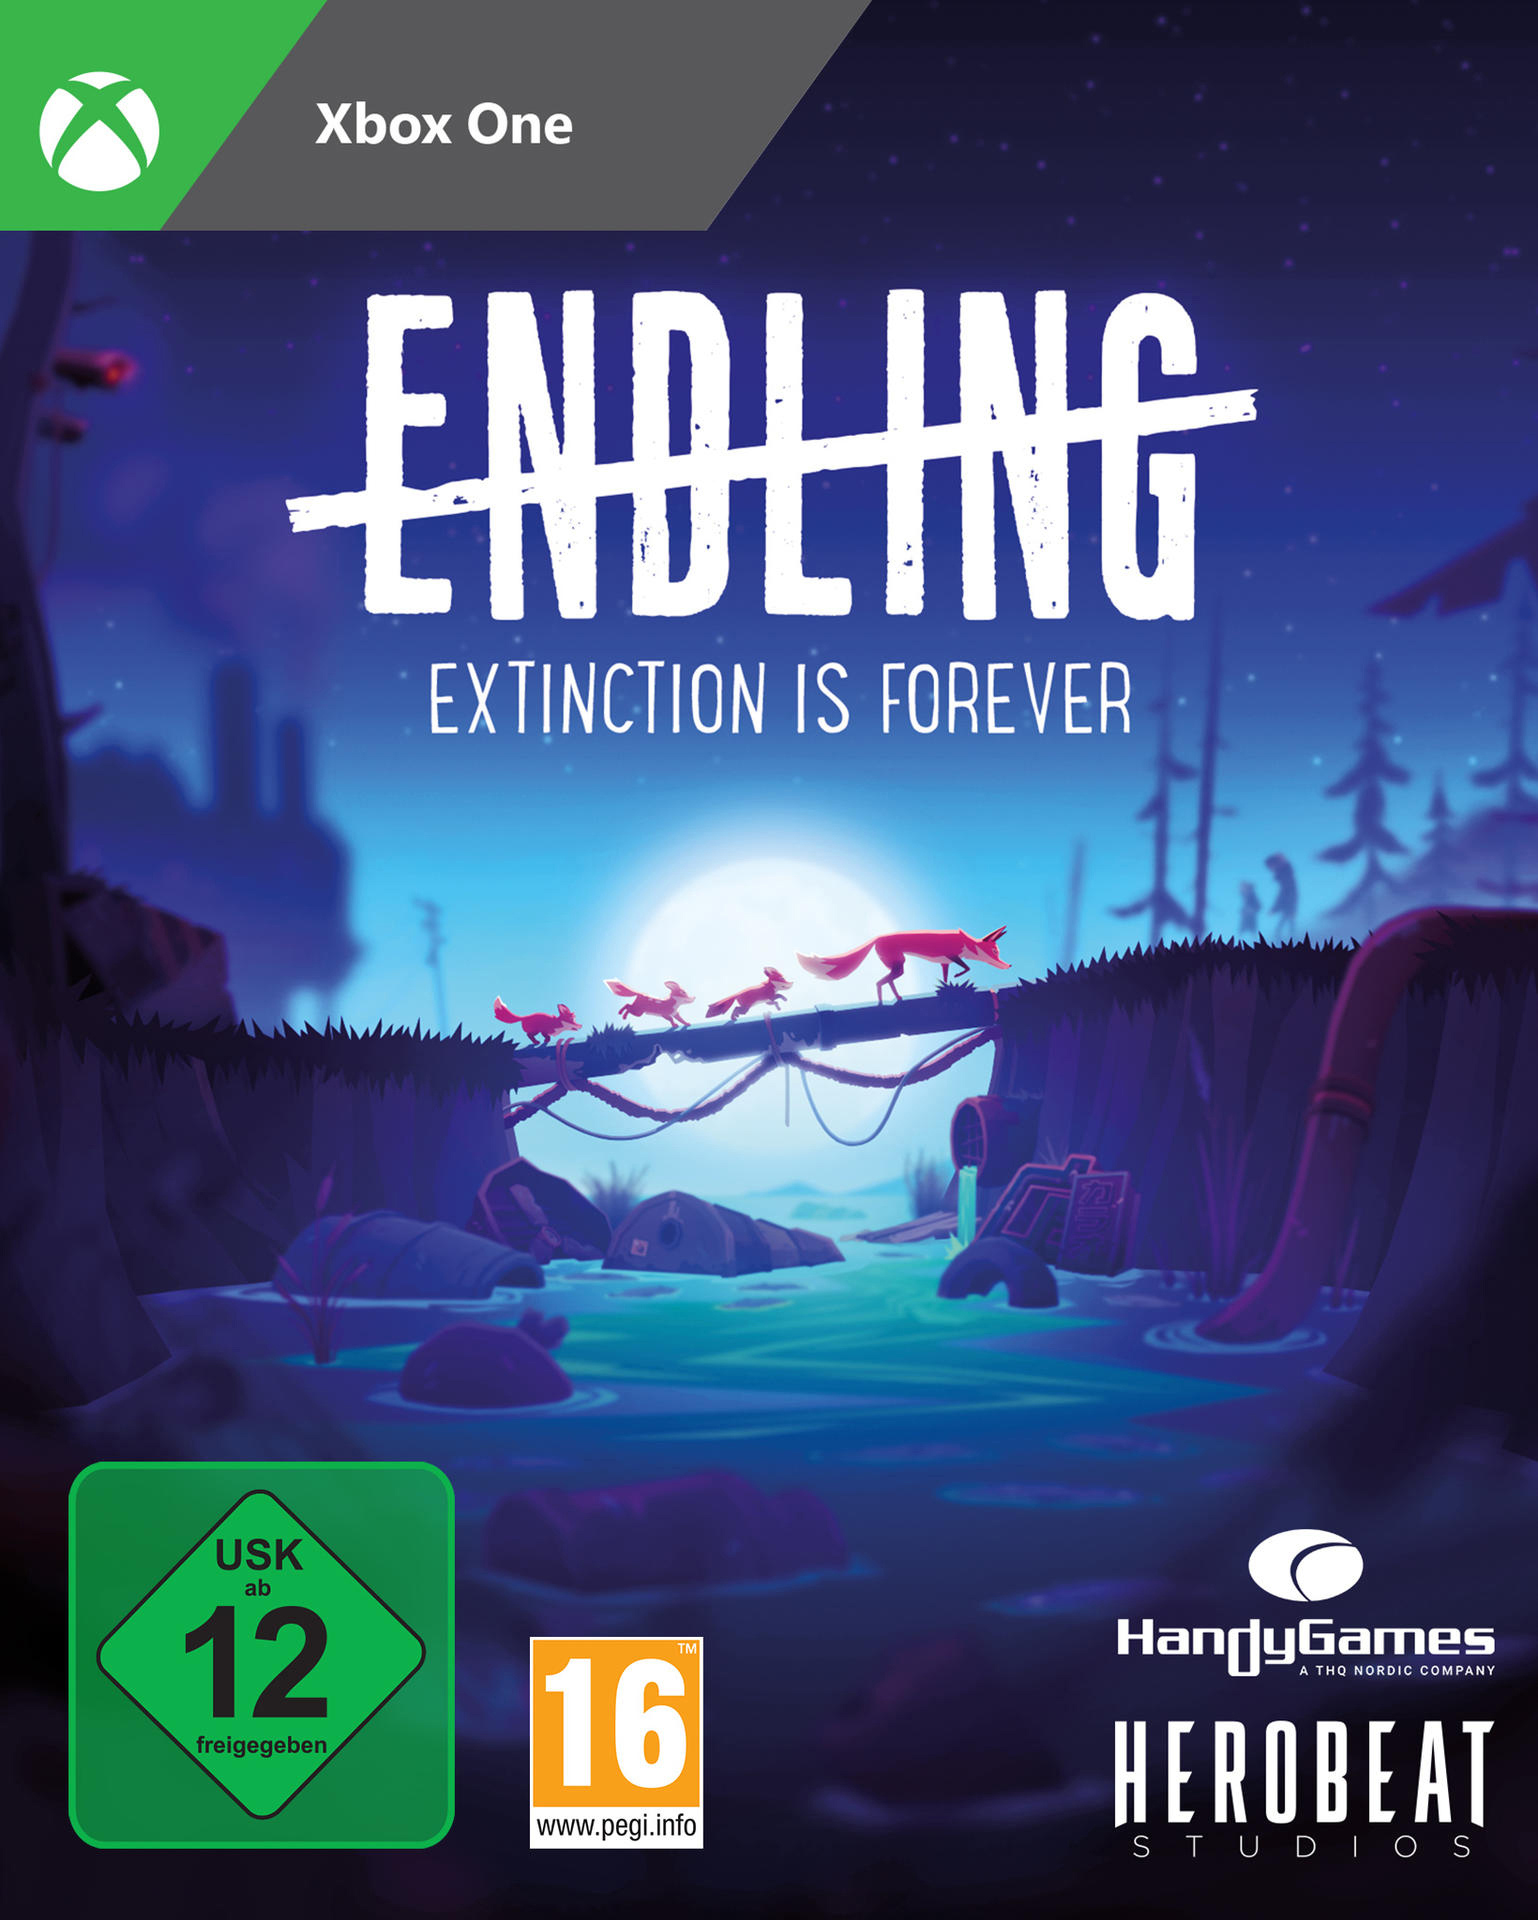 Endling - Extinction [Xbox Forever One] is 